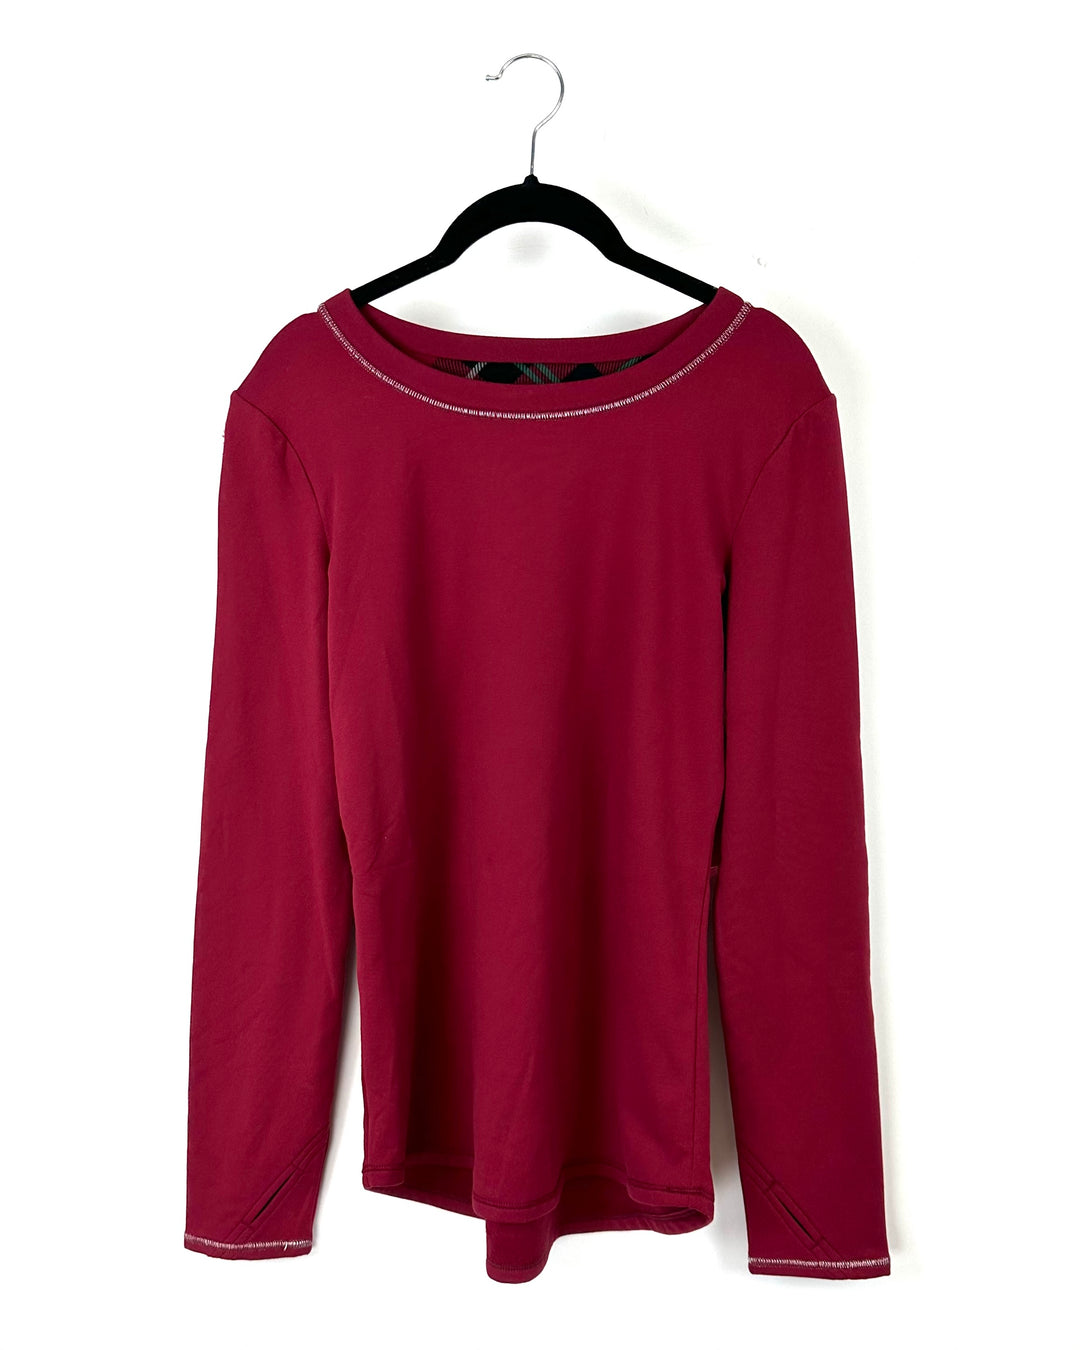 Red Long Sleeve Soft Top - Small